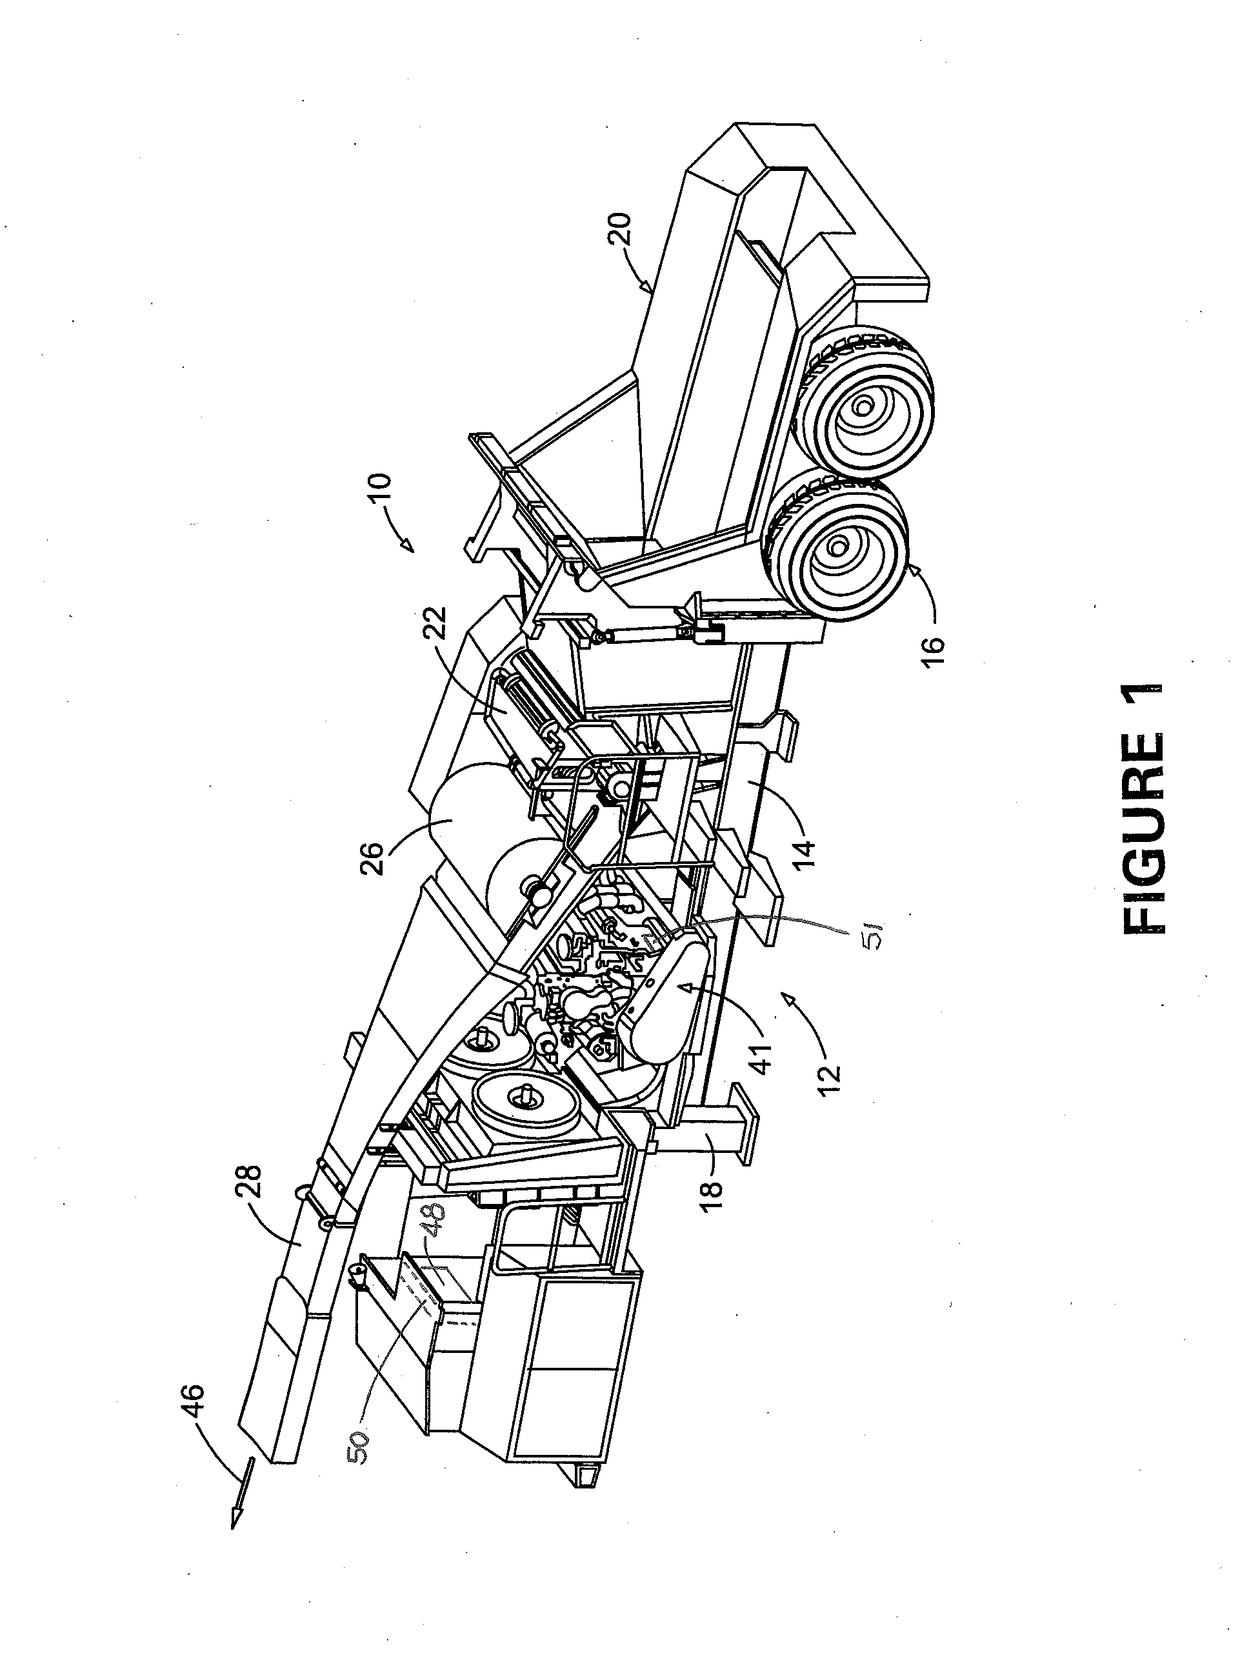 Wood chipper with optimized production control